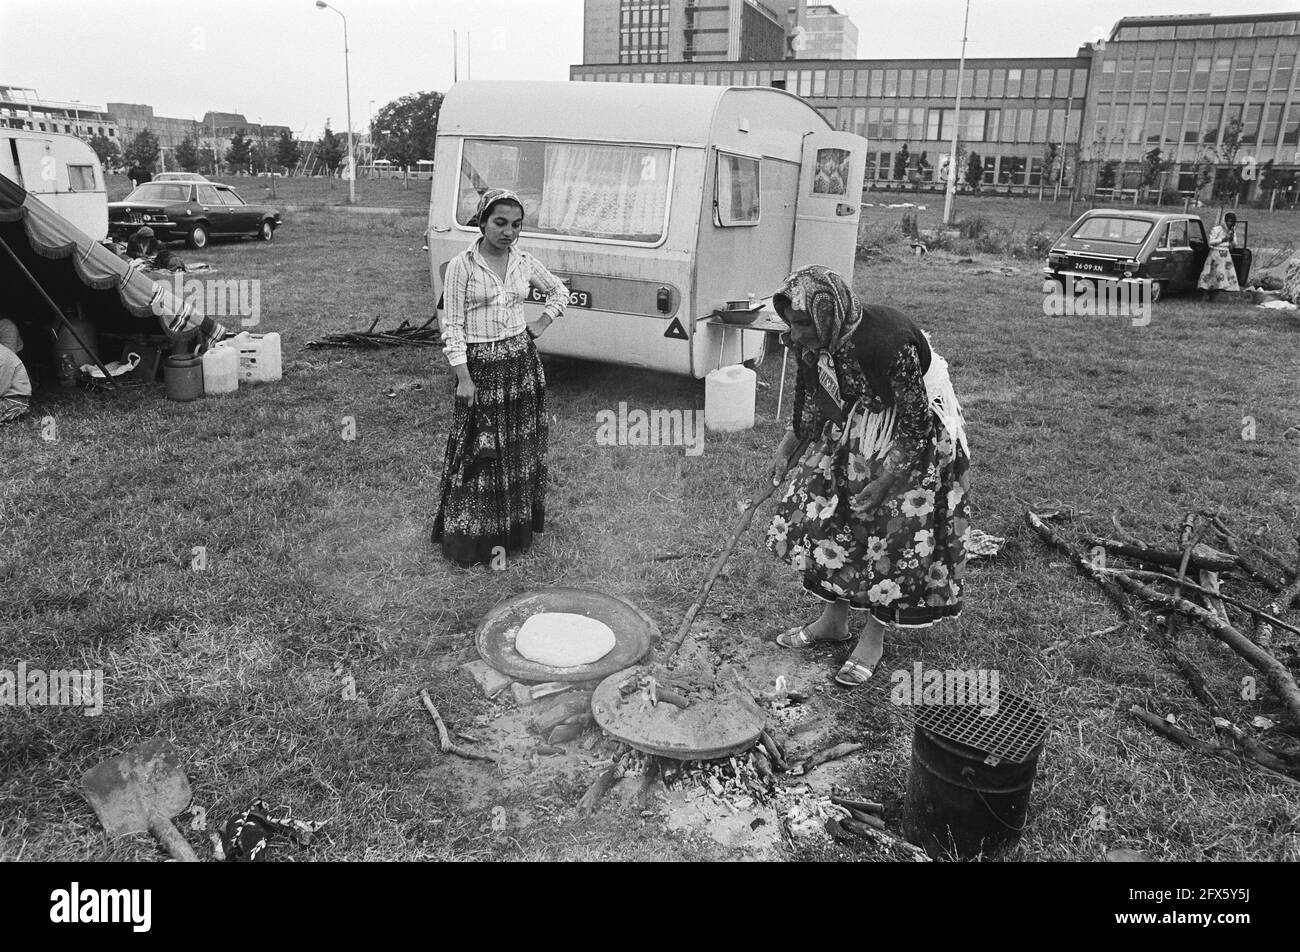 Group of Gypsies on Malieveld in The Hague, Gypsy woman preparing food, July 20, 1981, ZIGEUNERS, women, The Netherlands, 20th century press agency photo, news to remember, documentary, historic photography 1945-1990, visual stories, human history of the Twentieth Century, capturing moments in time Stock Photo